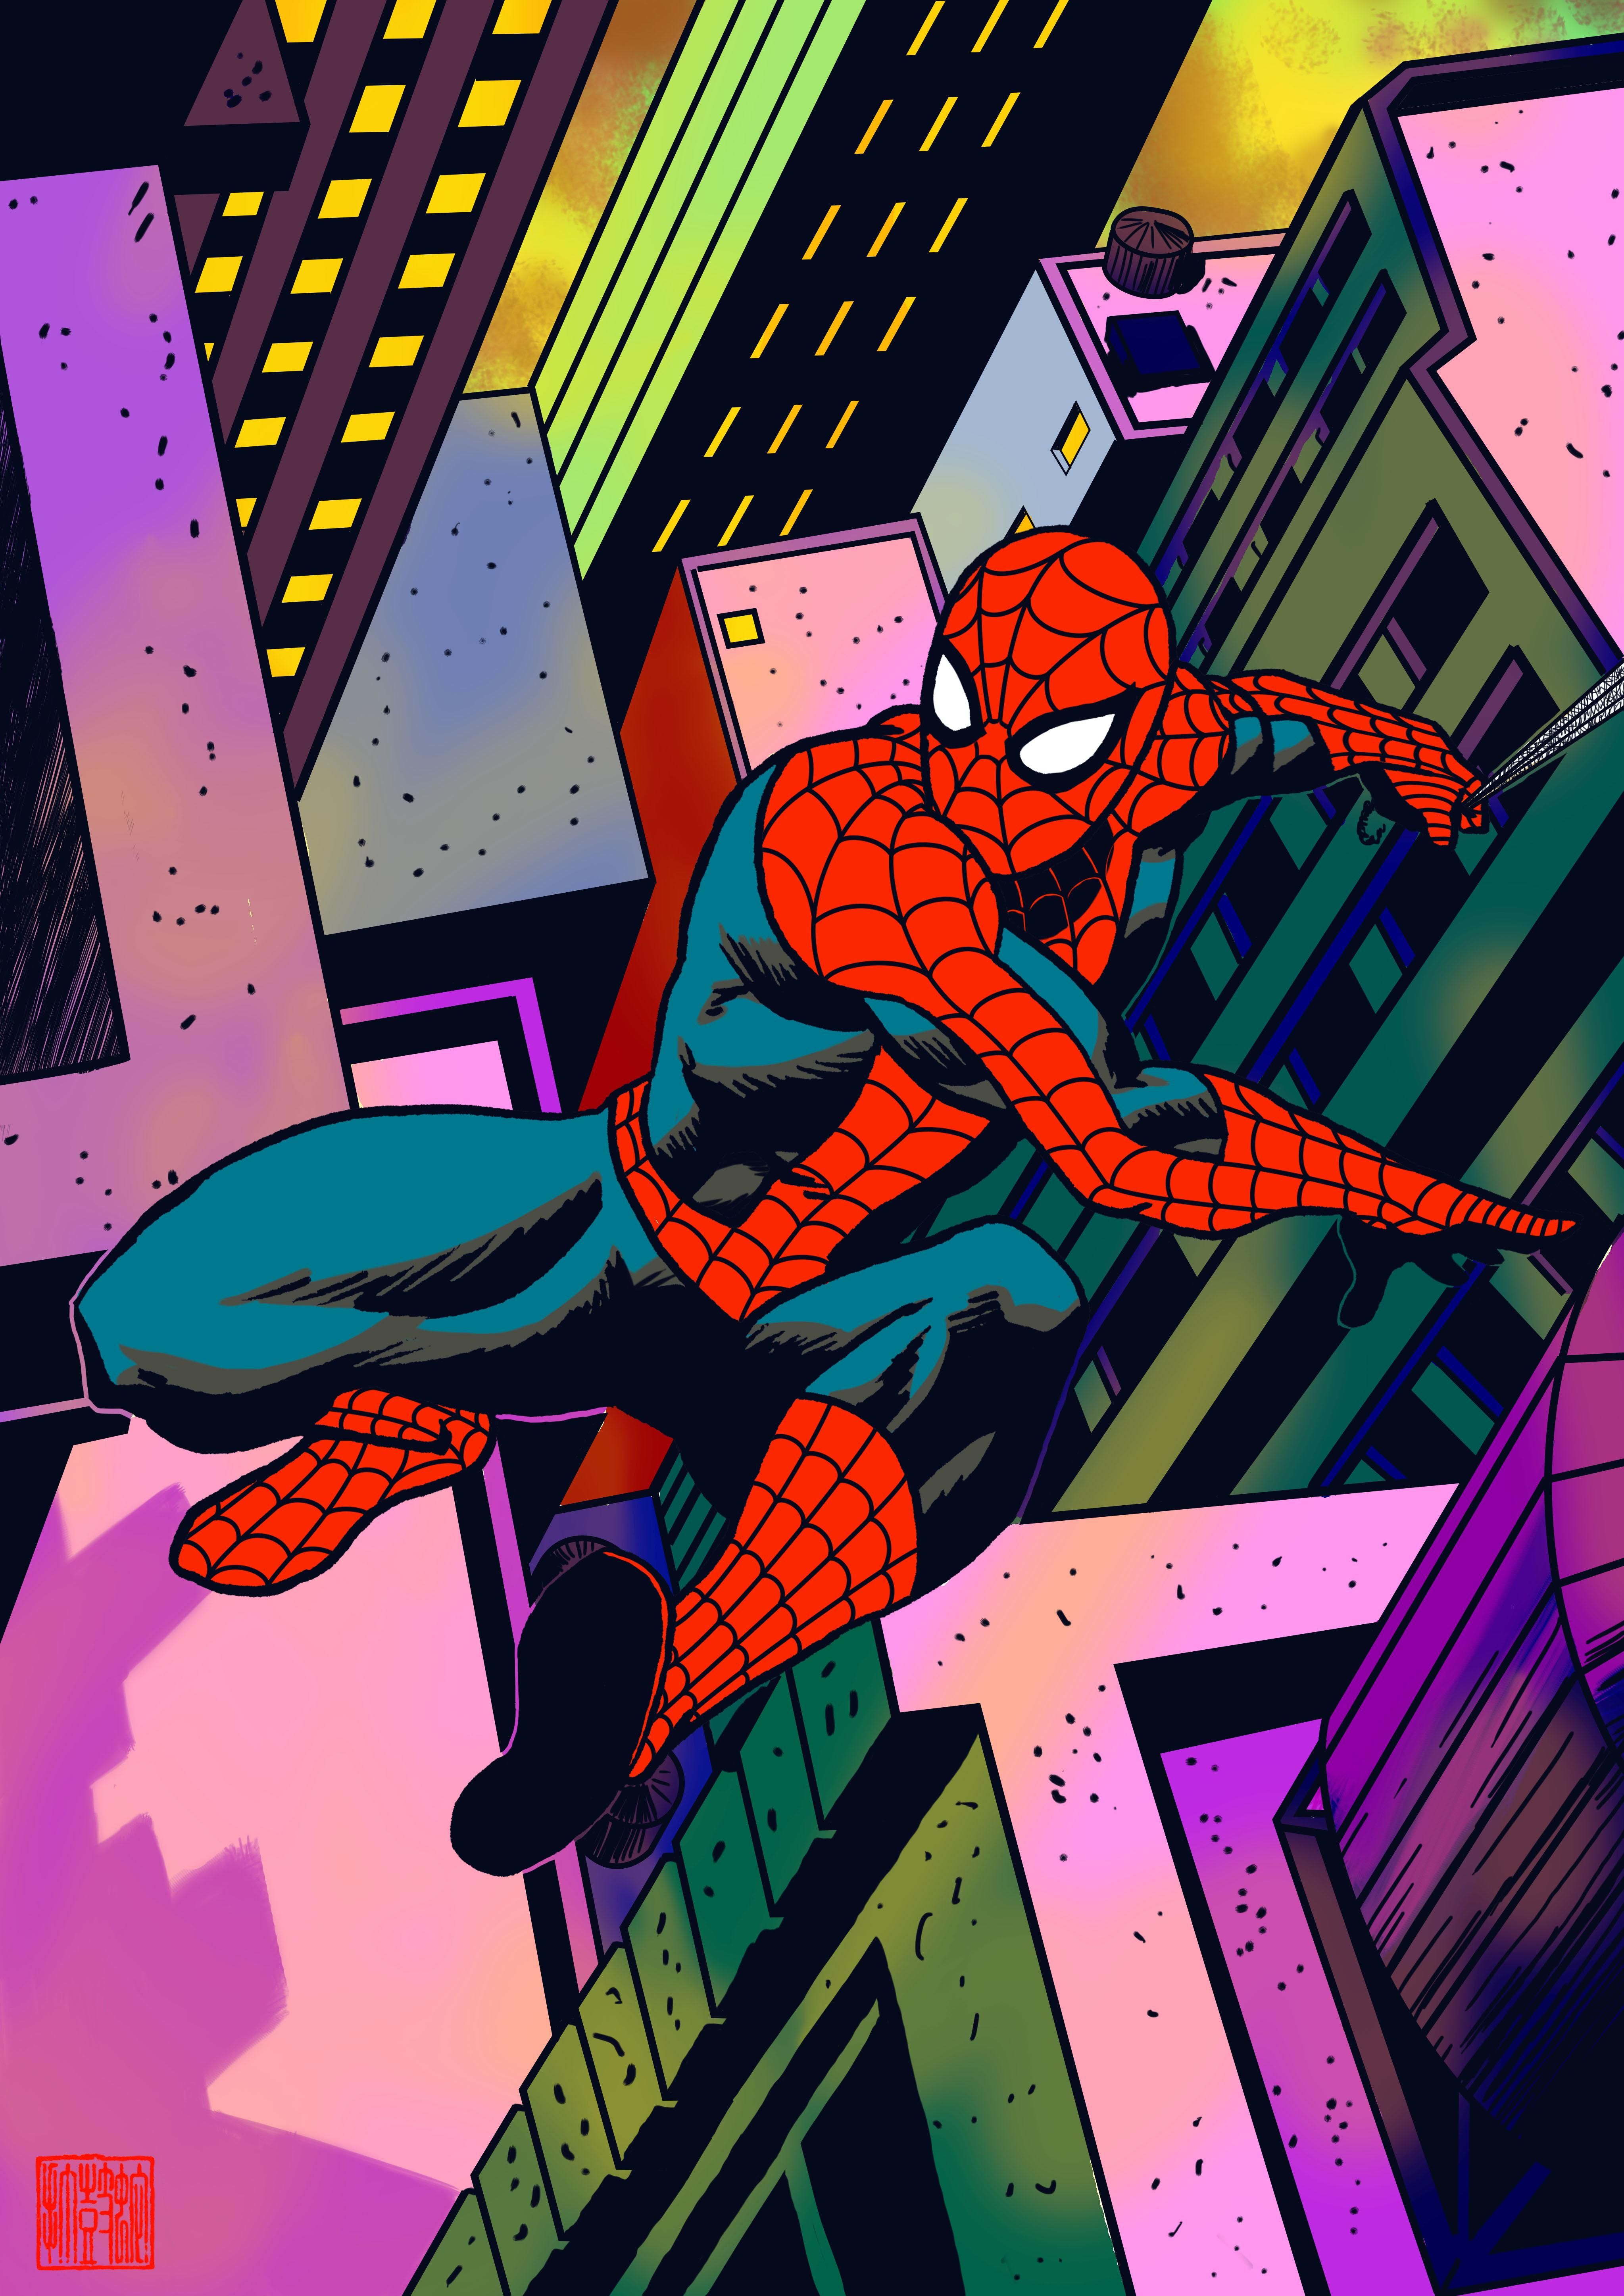 Spider-Man (1967) Wallpapers